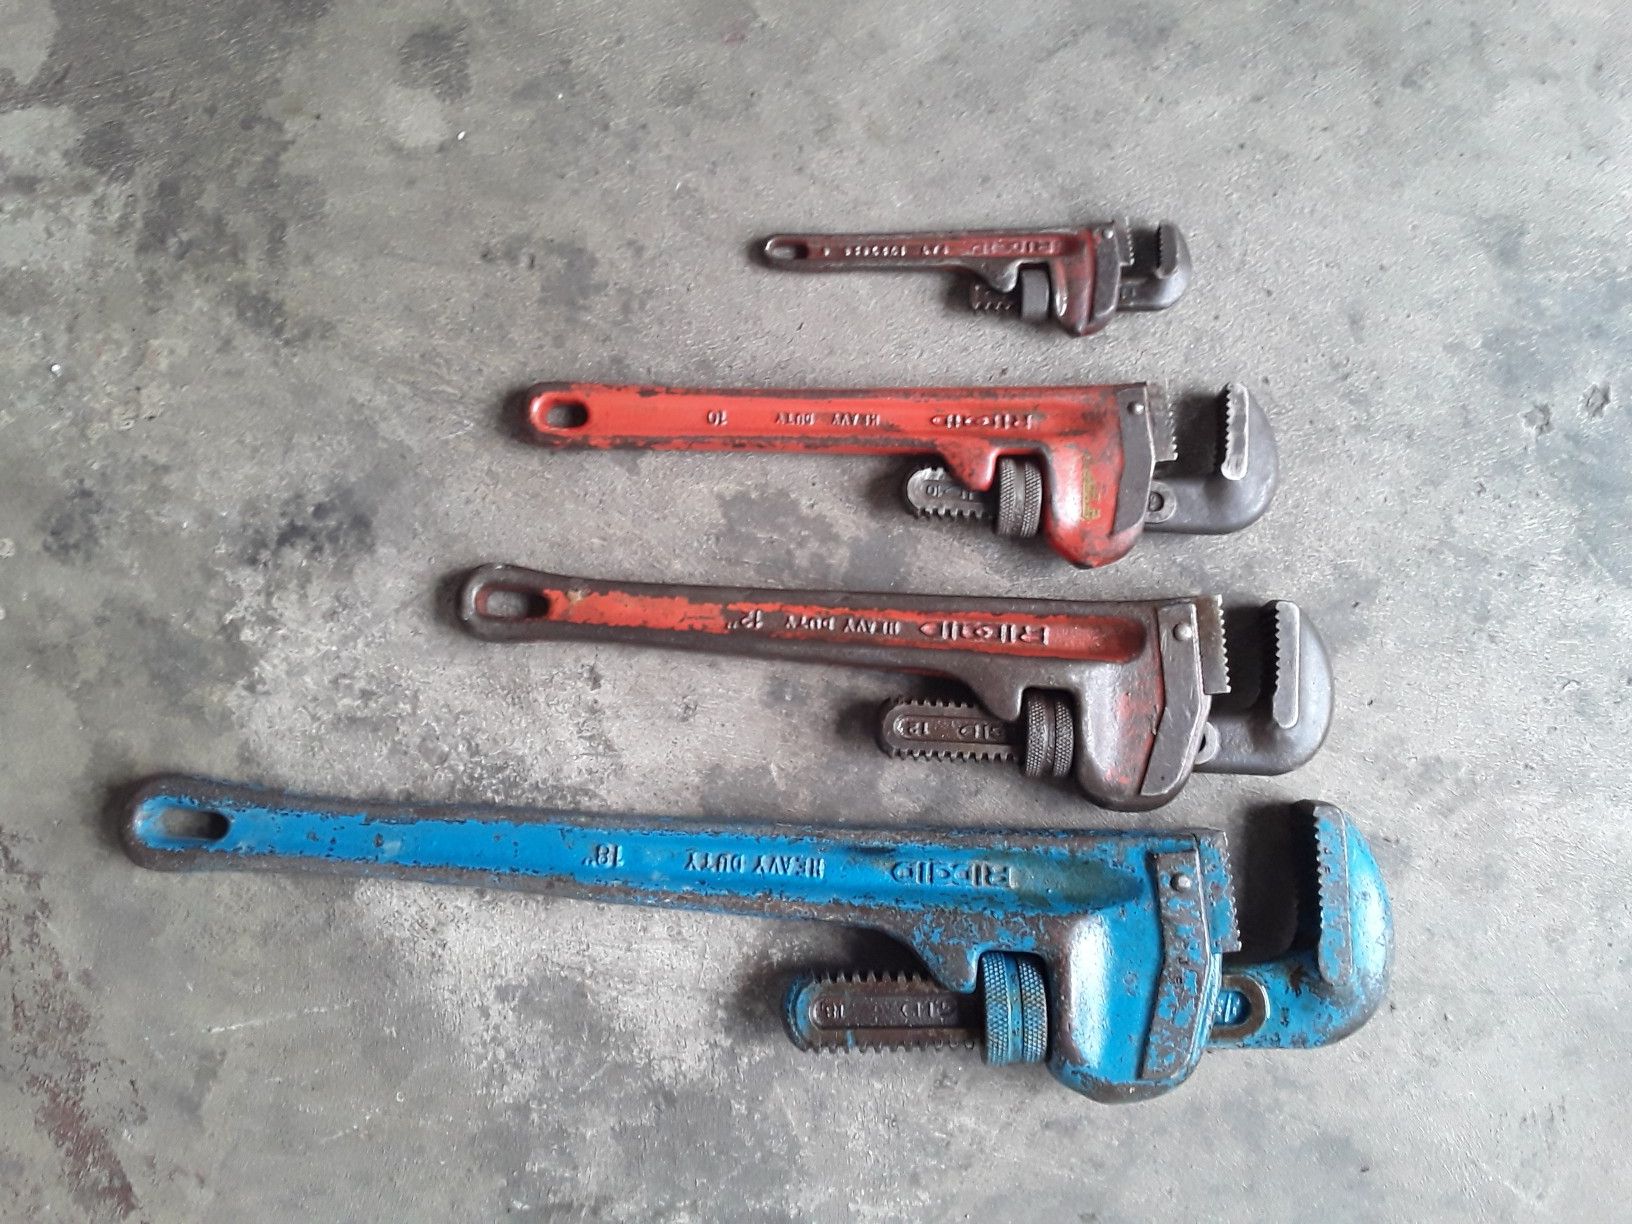 Ridgid pipe wrenches